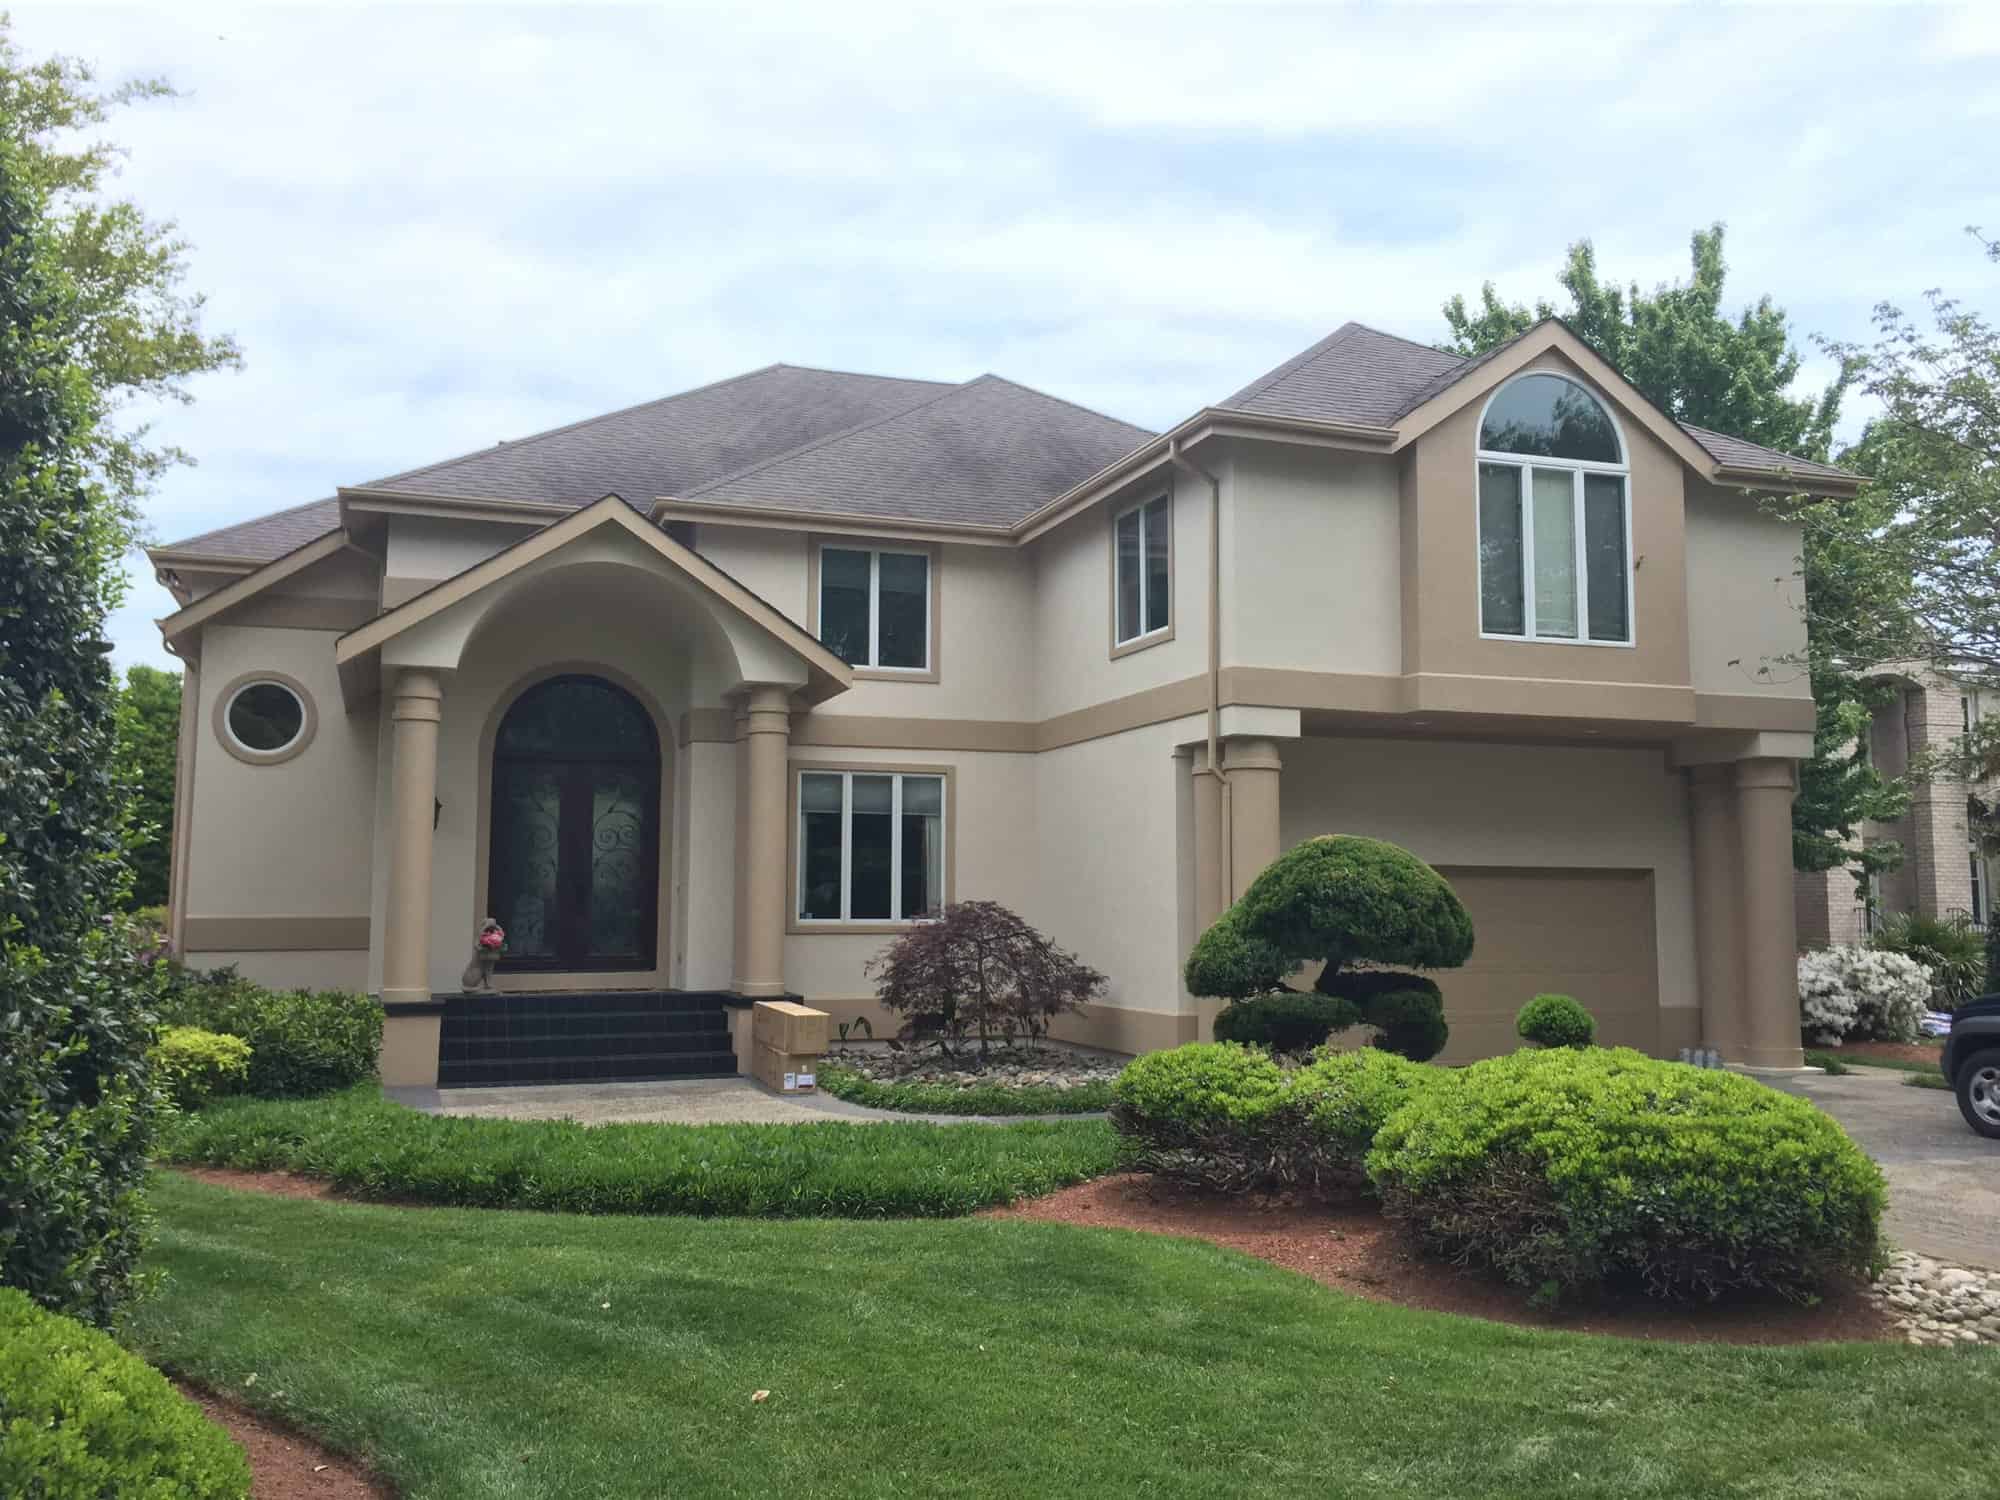 Professional house painters offering top-rated exterior painting services in Virginia Beach.